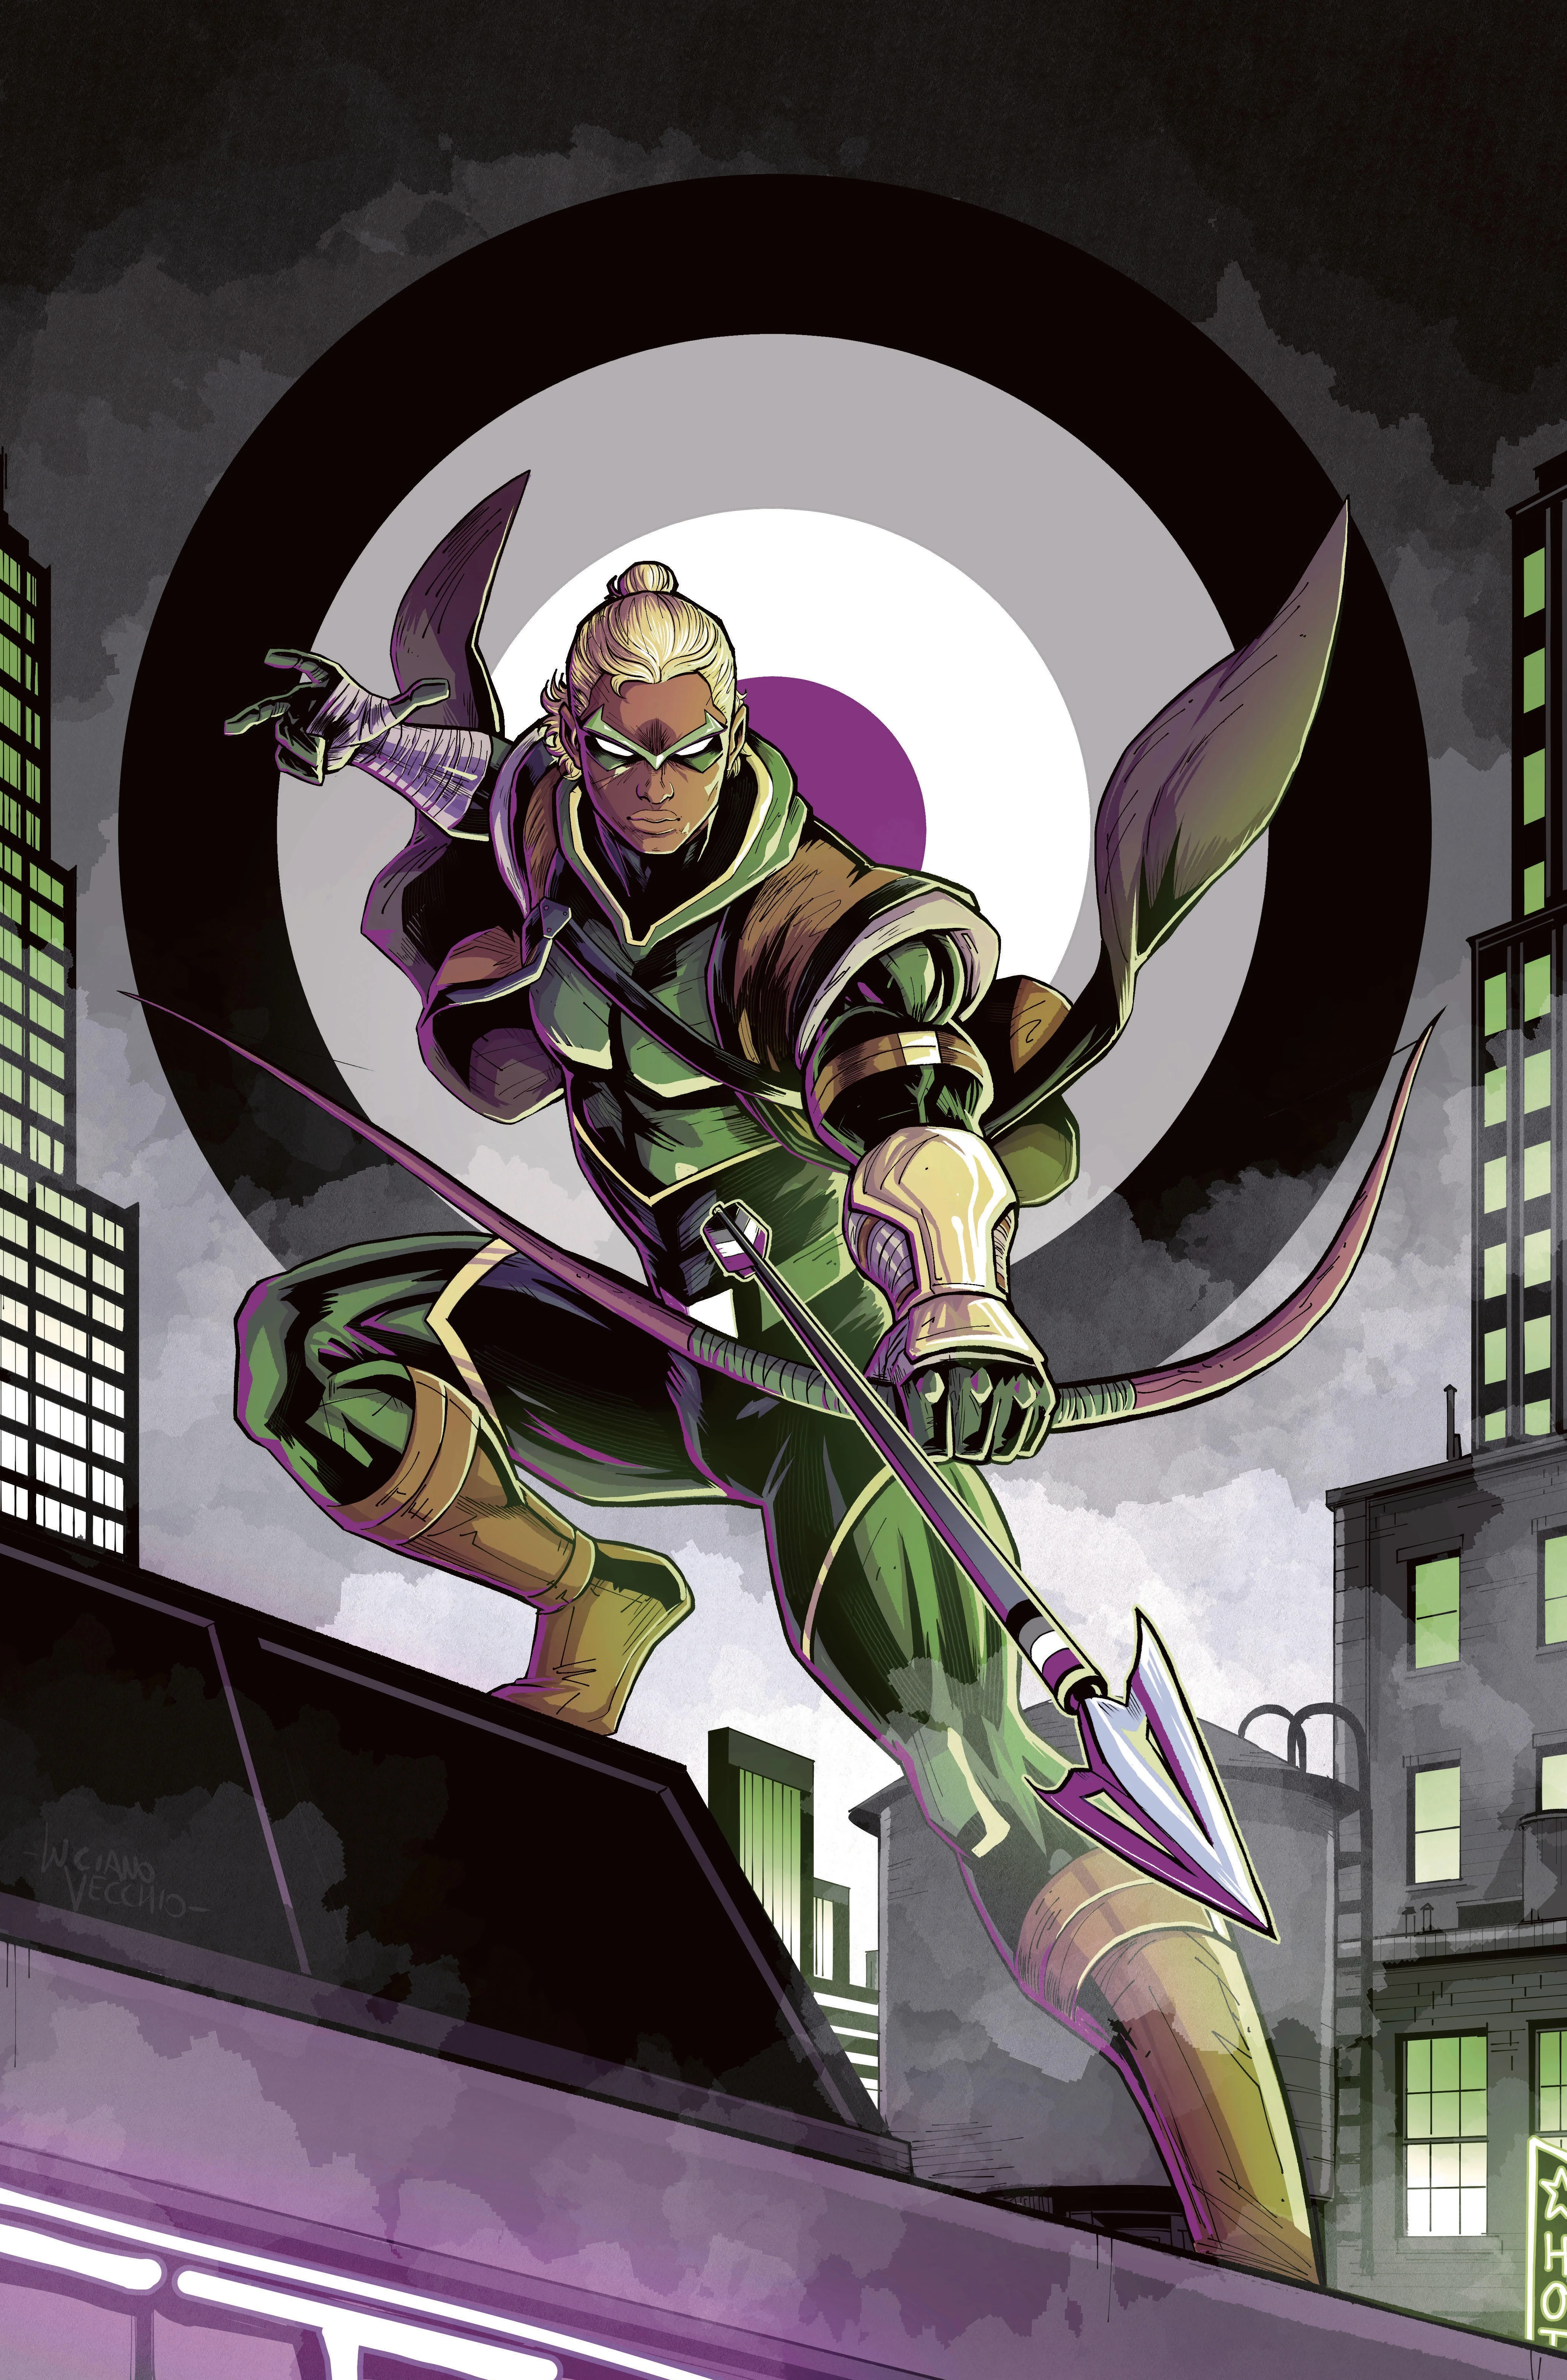 Green Arrow: Year One (2007—2007), DC Database